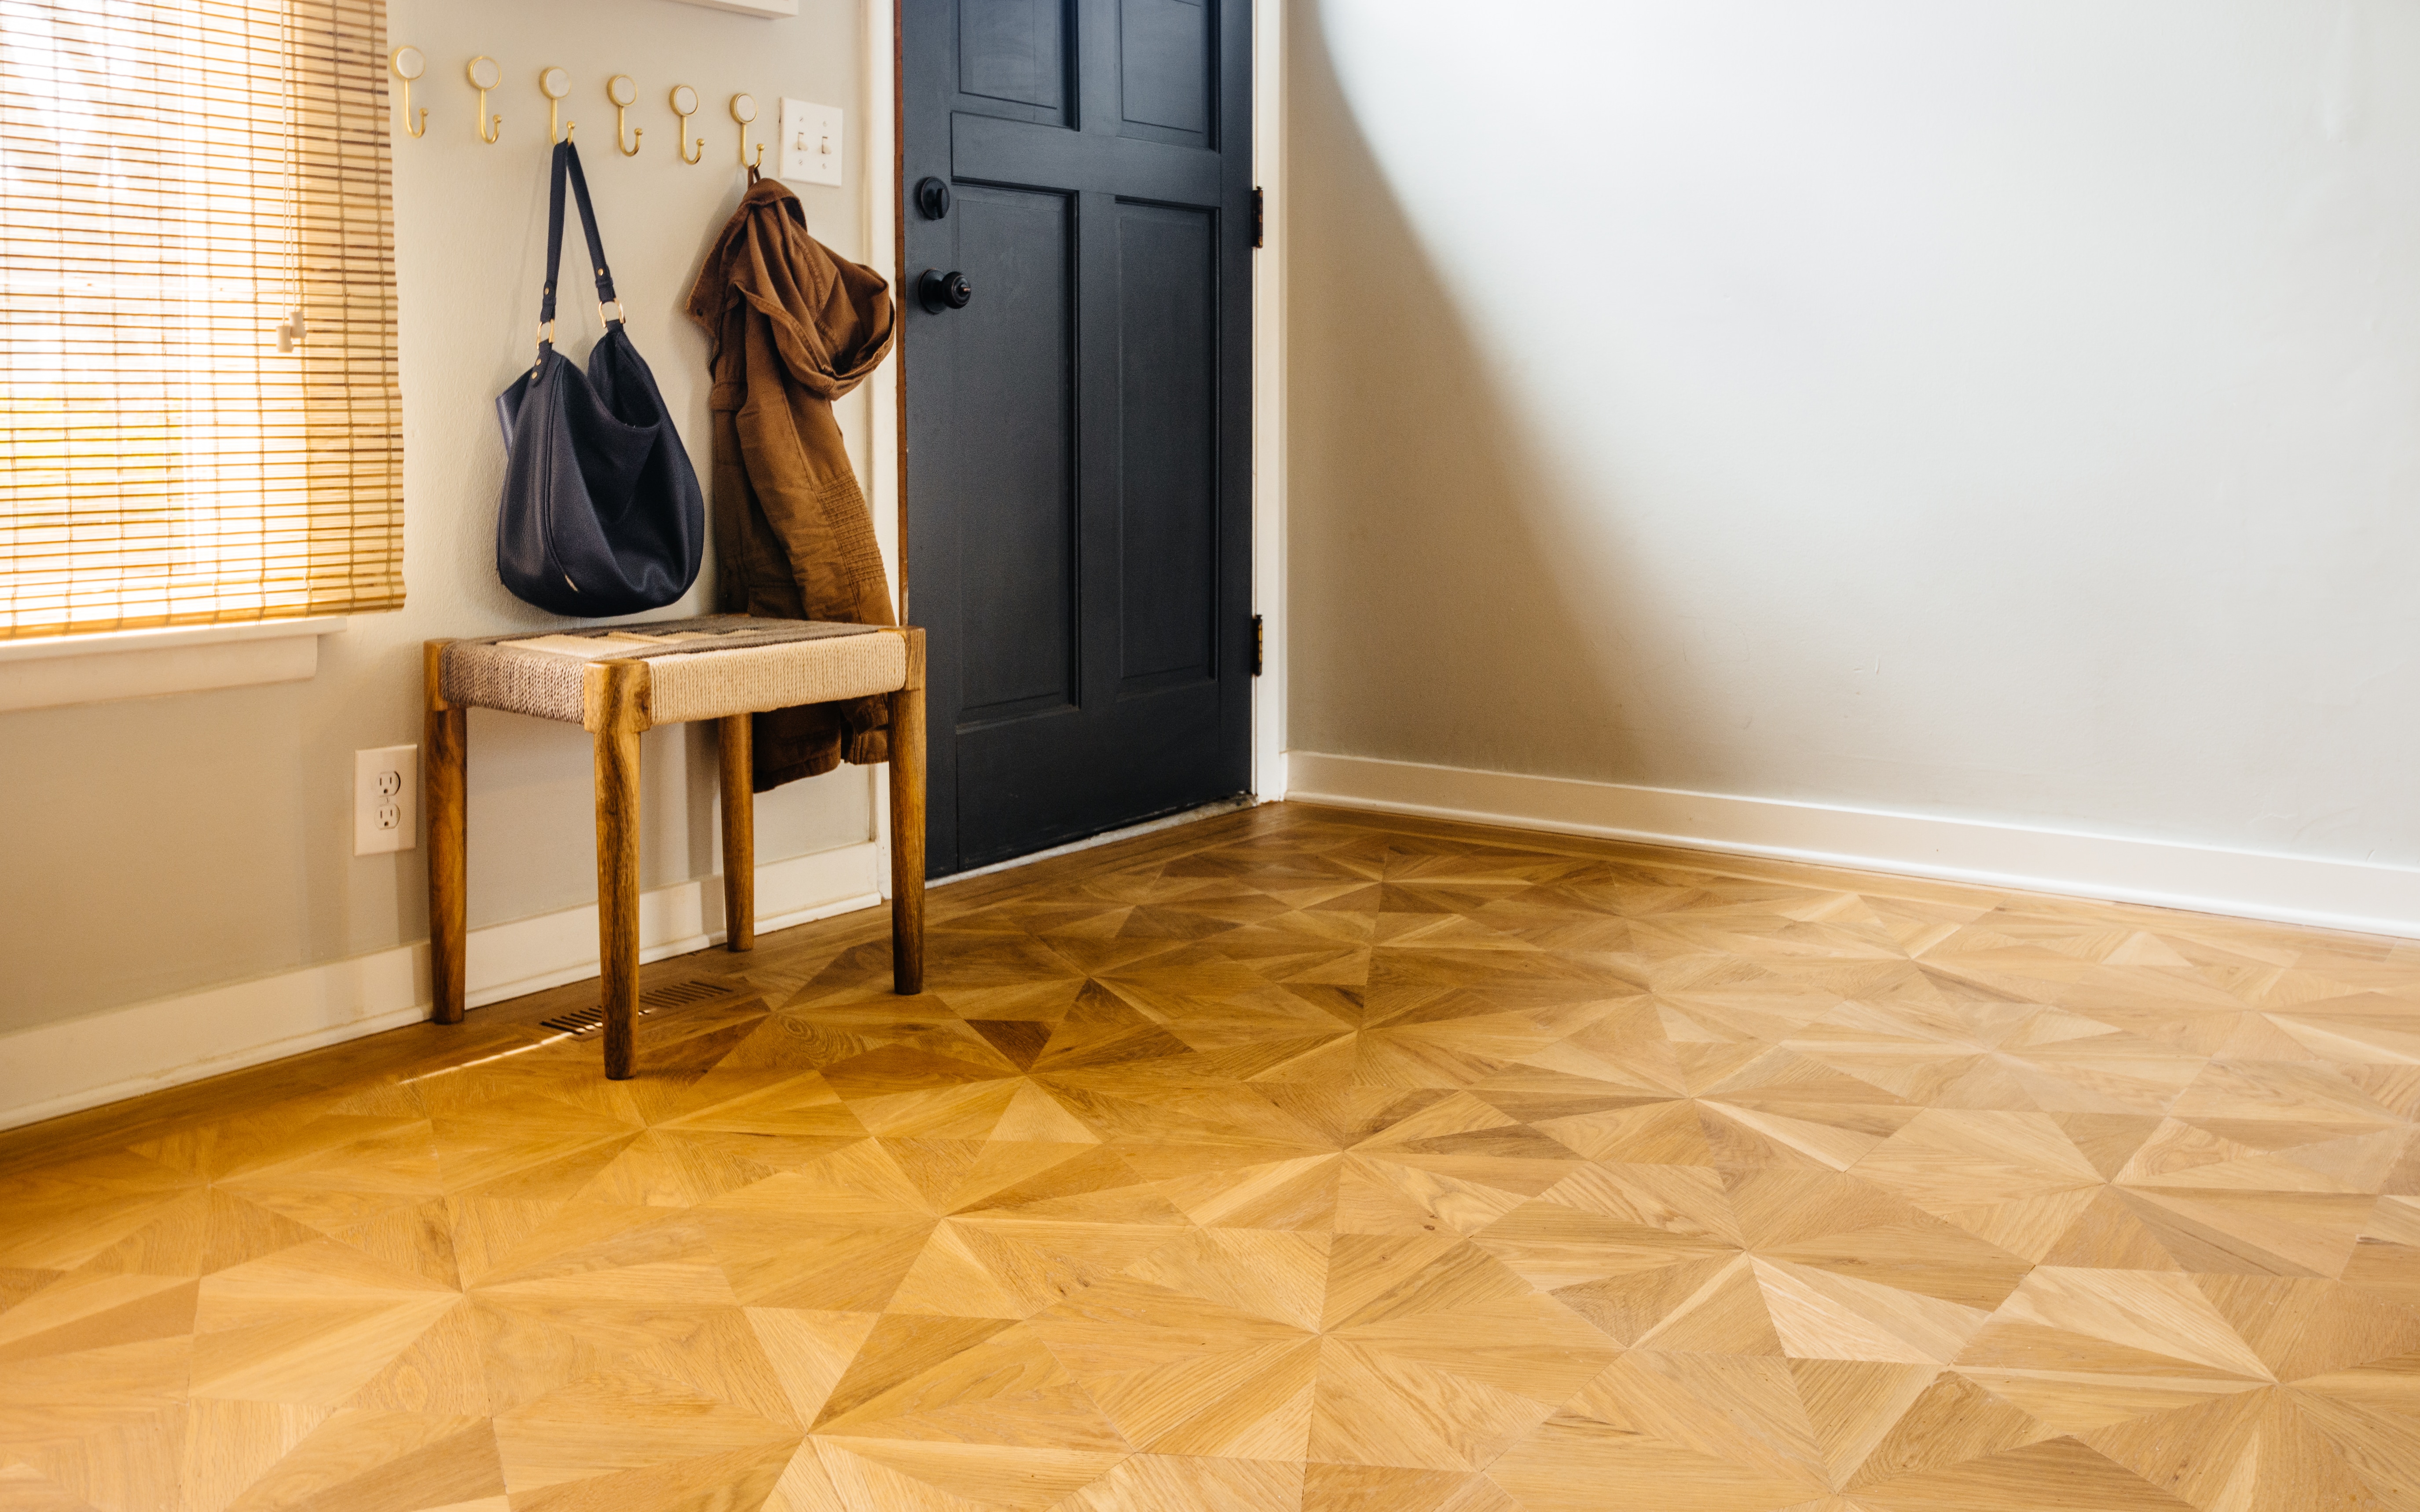 Custom hardwood floors do not have to be stuffy, old-fashioned affairs. Whether it's a classic herringbone pattern or an original midcentury design, we enjoy every opportunity to create hardwood floors perfectly suited to your home and design style.